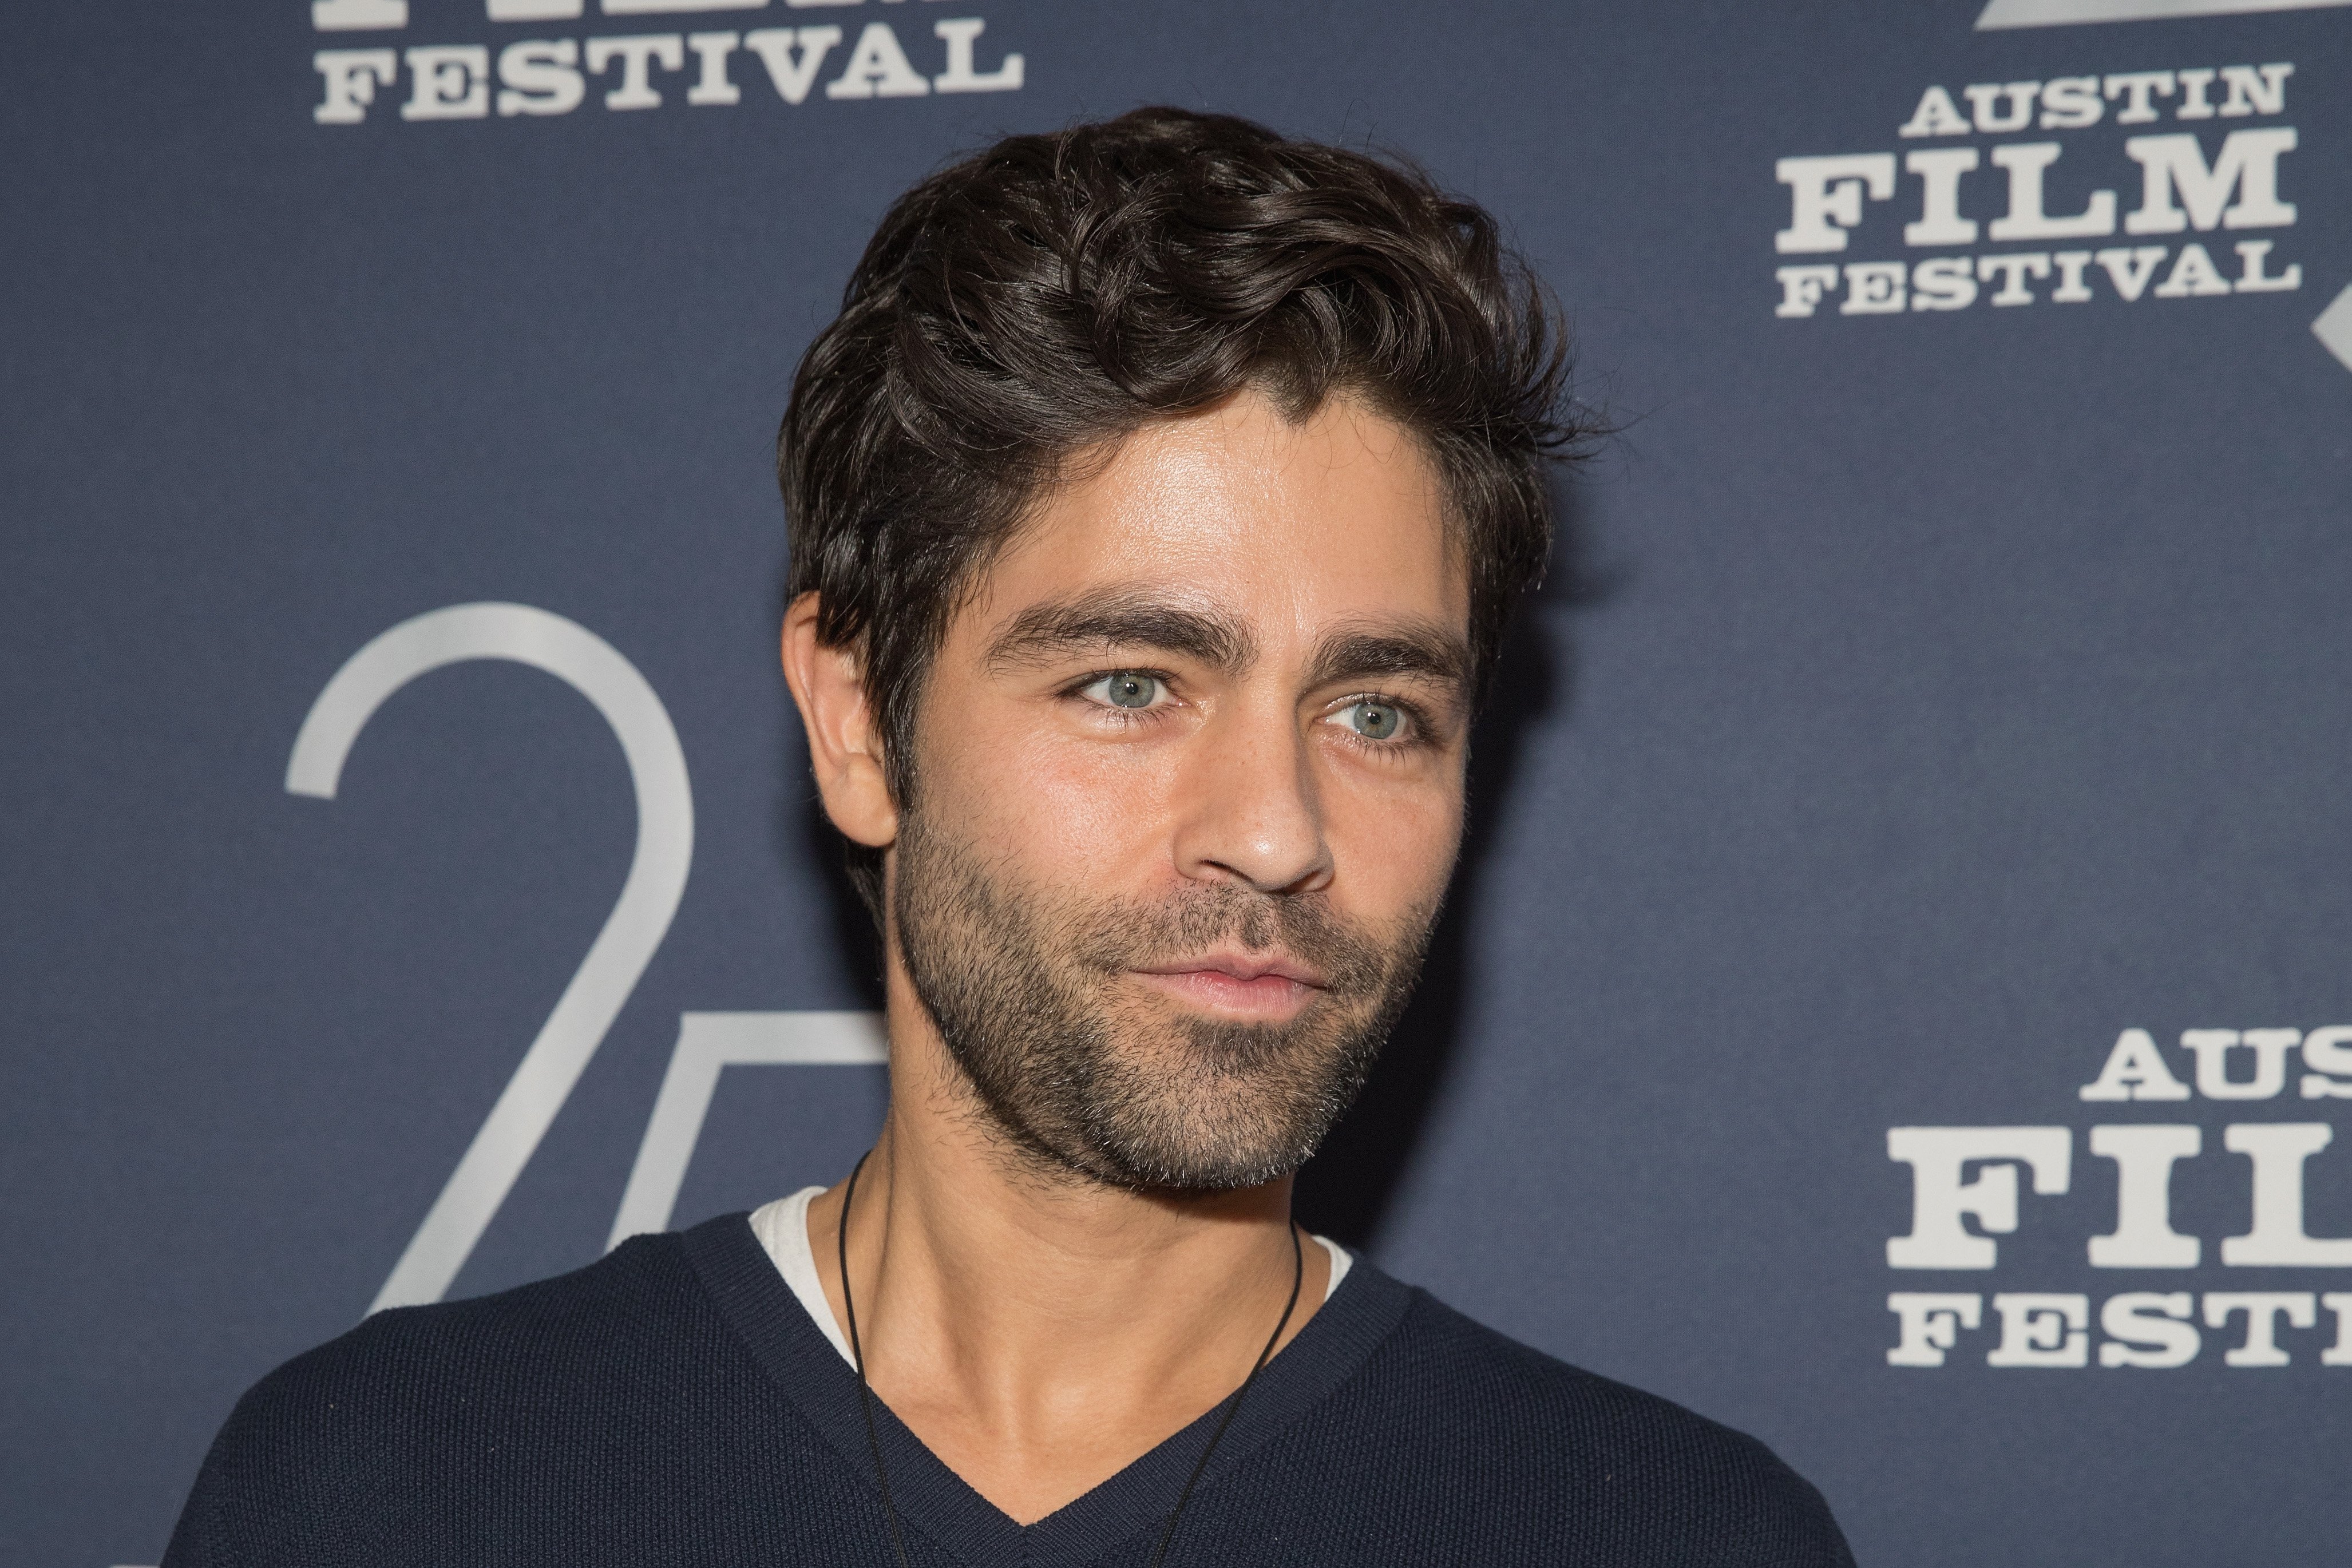 Adrian Grenier on October 25, 2018 in Austin, Texas | Source: Getty Images 